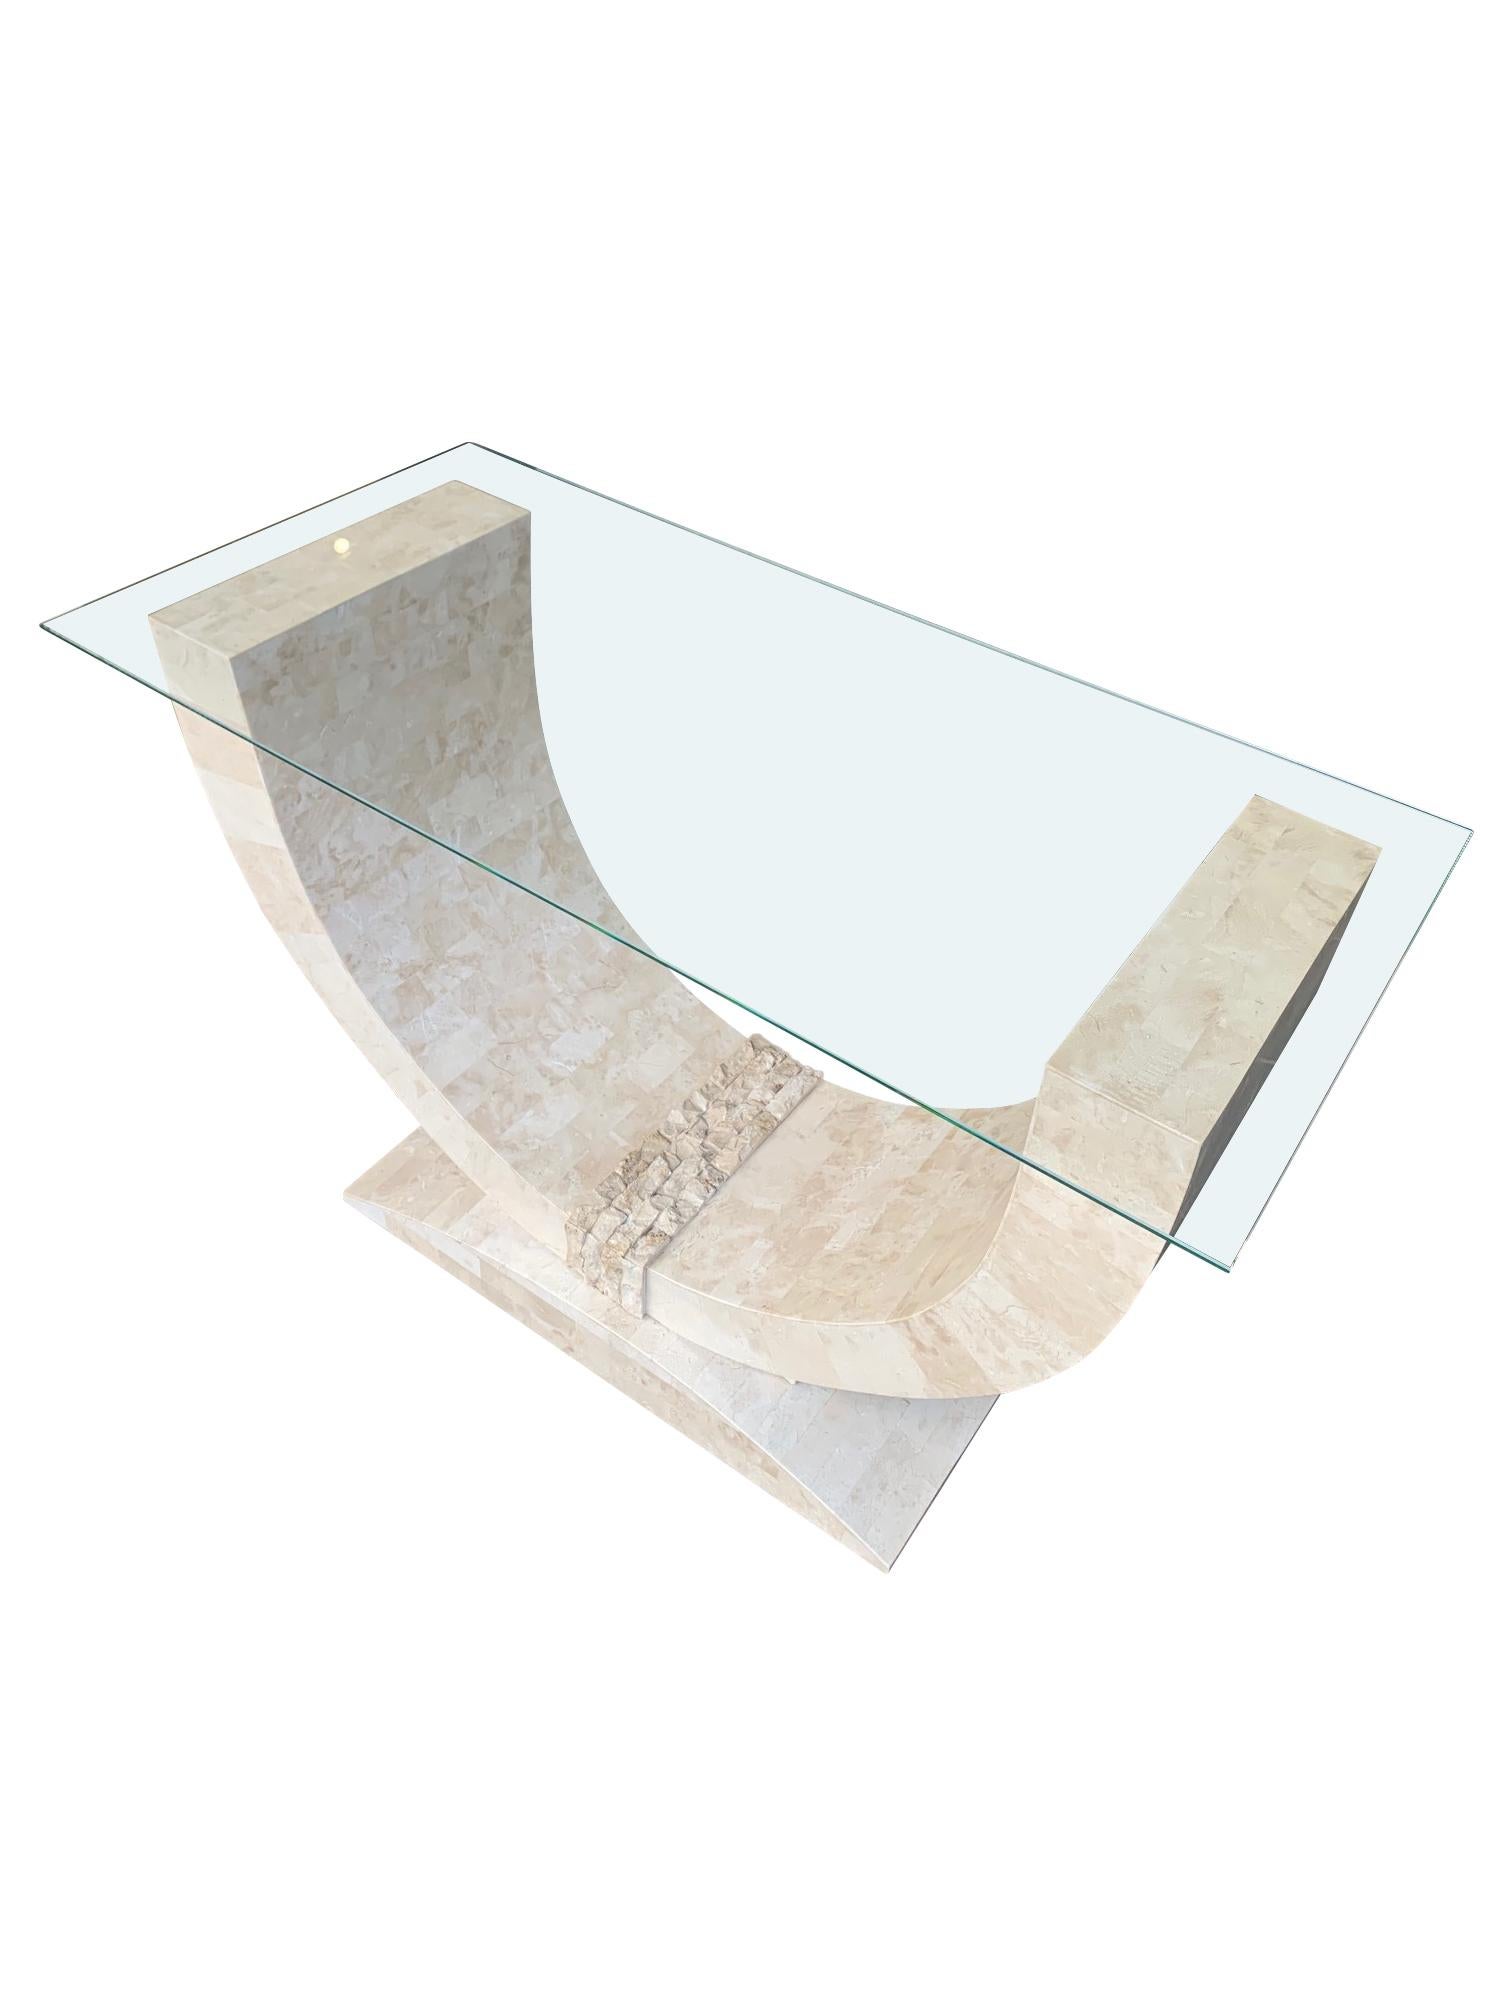 Late 20th Century Maitland Smith Tessellated Marble Console Table with Bevelled Glass Top For Sale